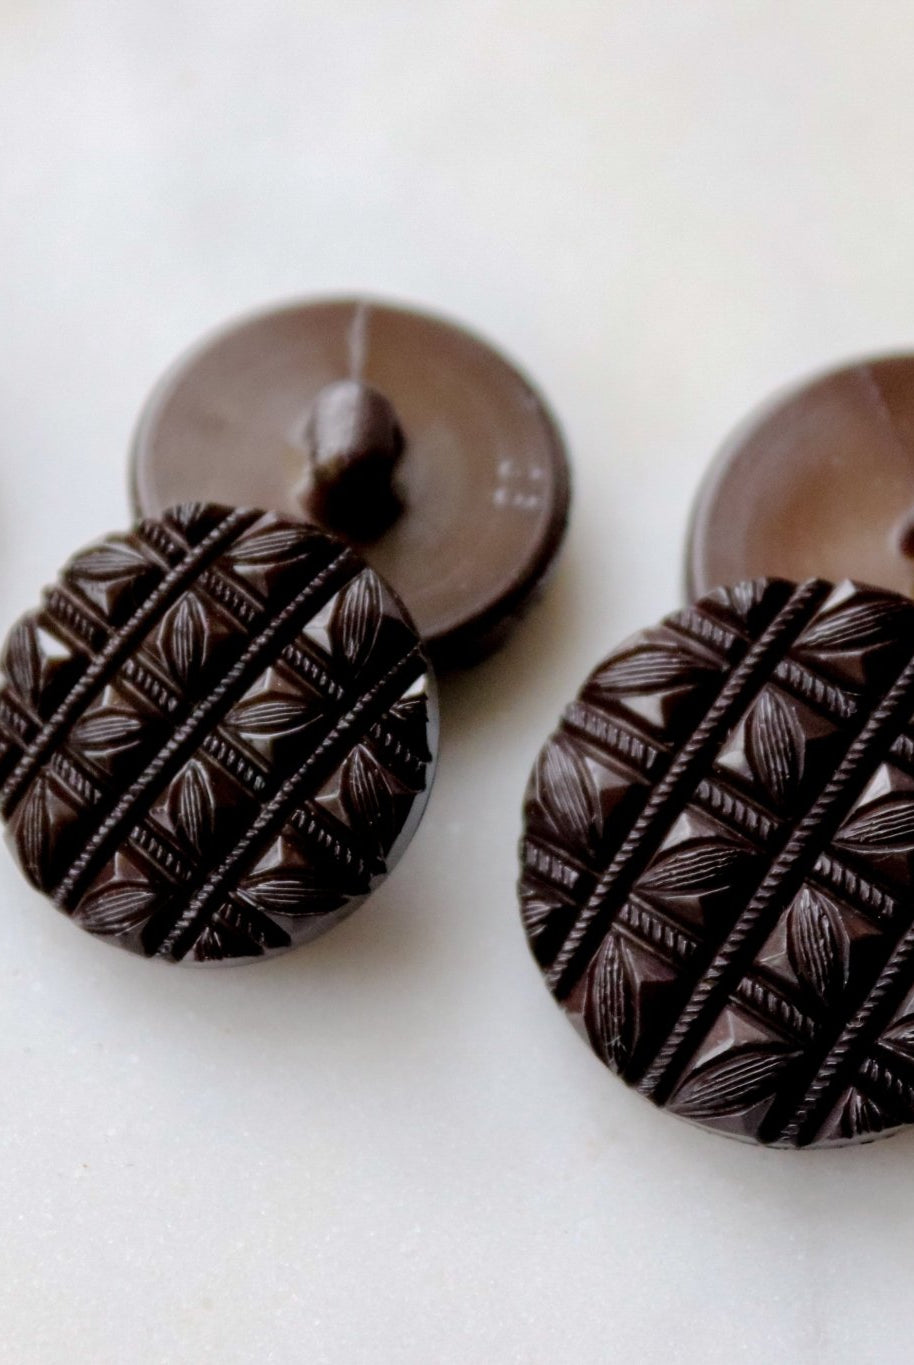 Etched Hepburn Shank Buttons in Brown. Available in 15mm, 23mm, 28mm - Boho Fabrics